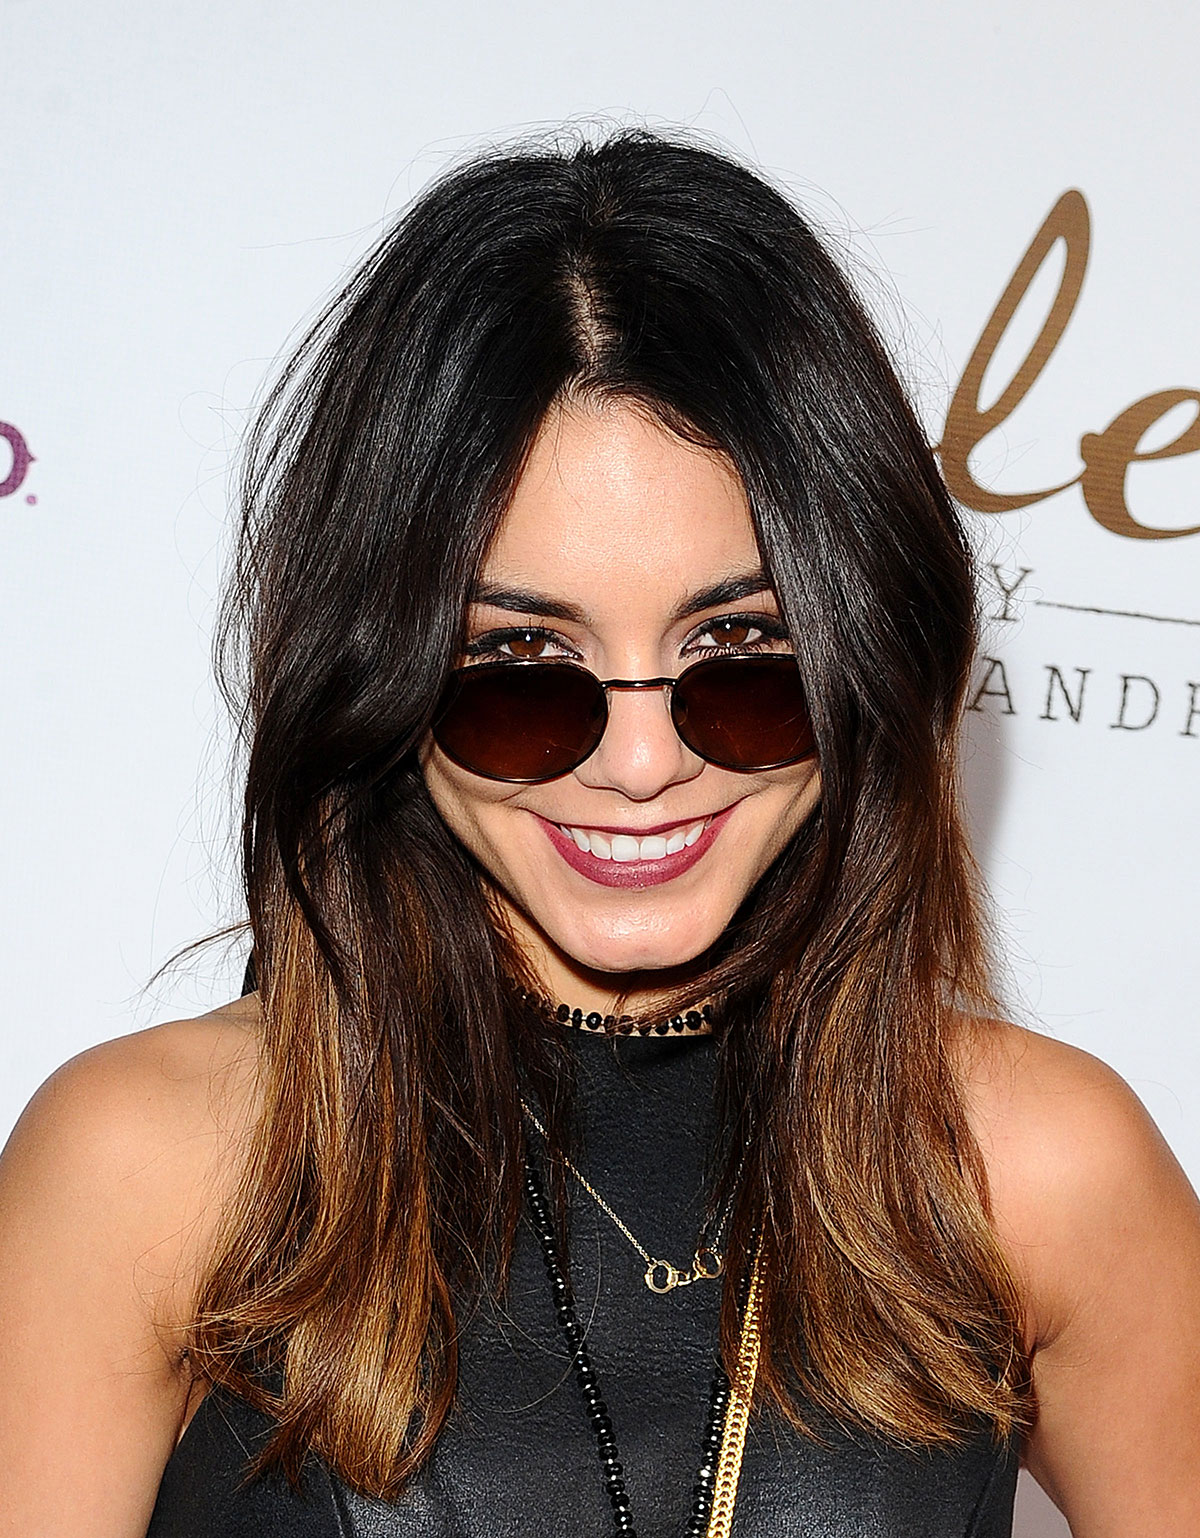 Vanessa Hudgens attends Ale by Alessandra Collection